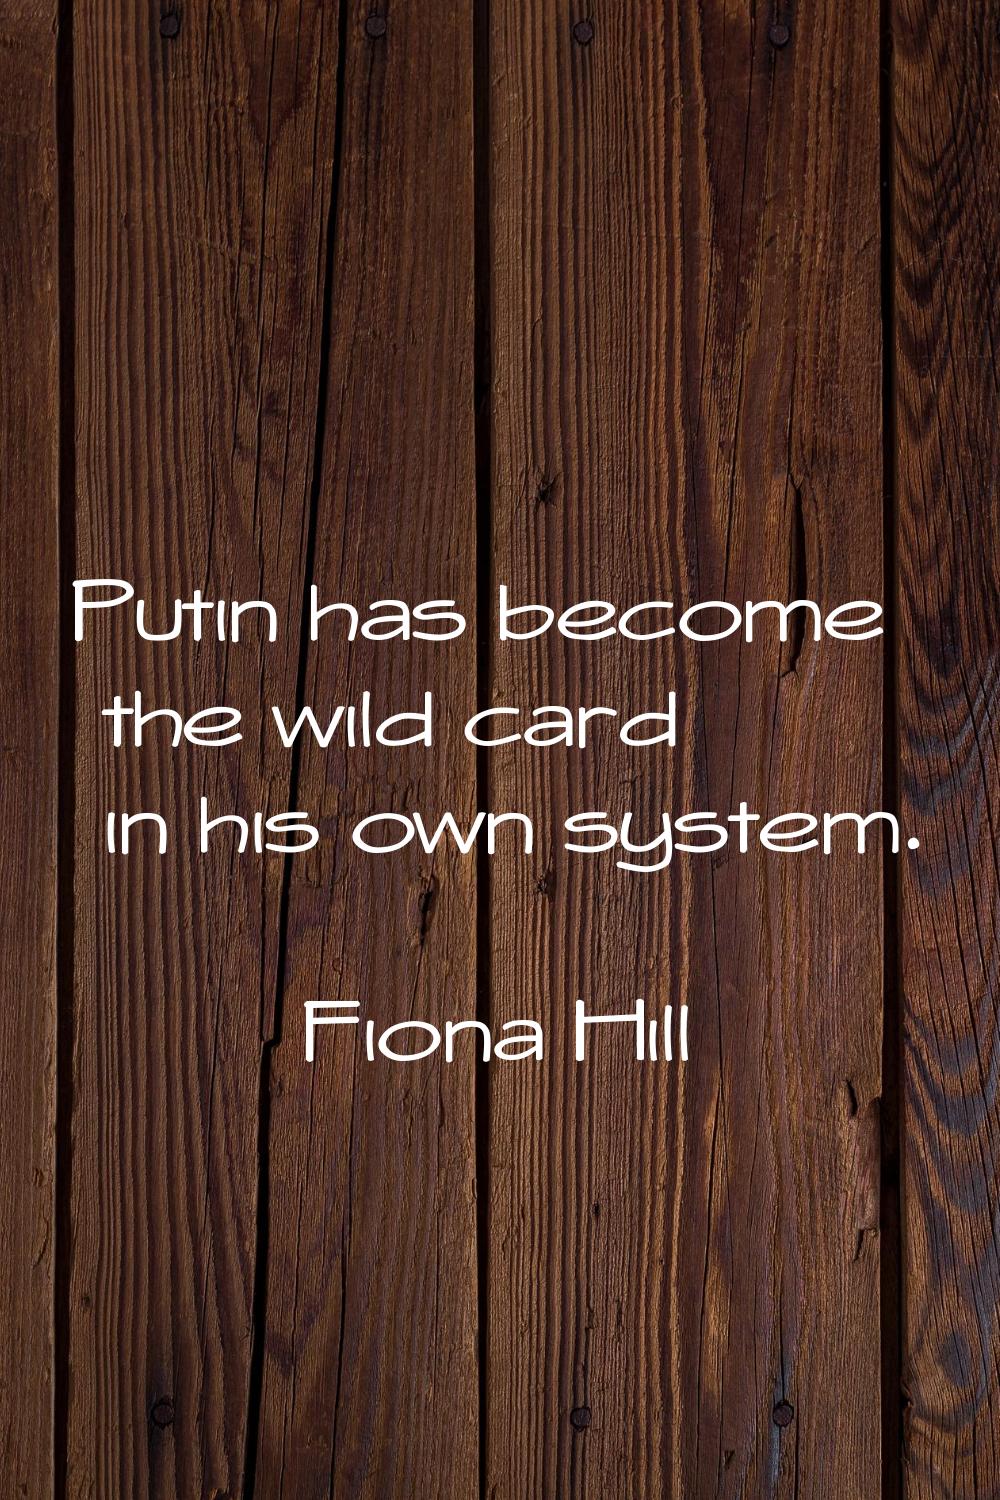 Putin has become the wild card in his own system.